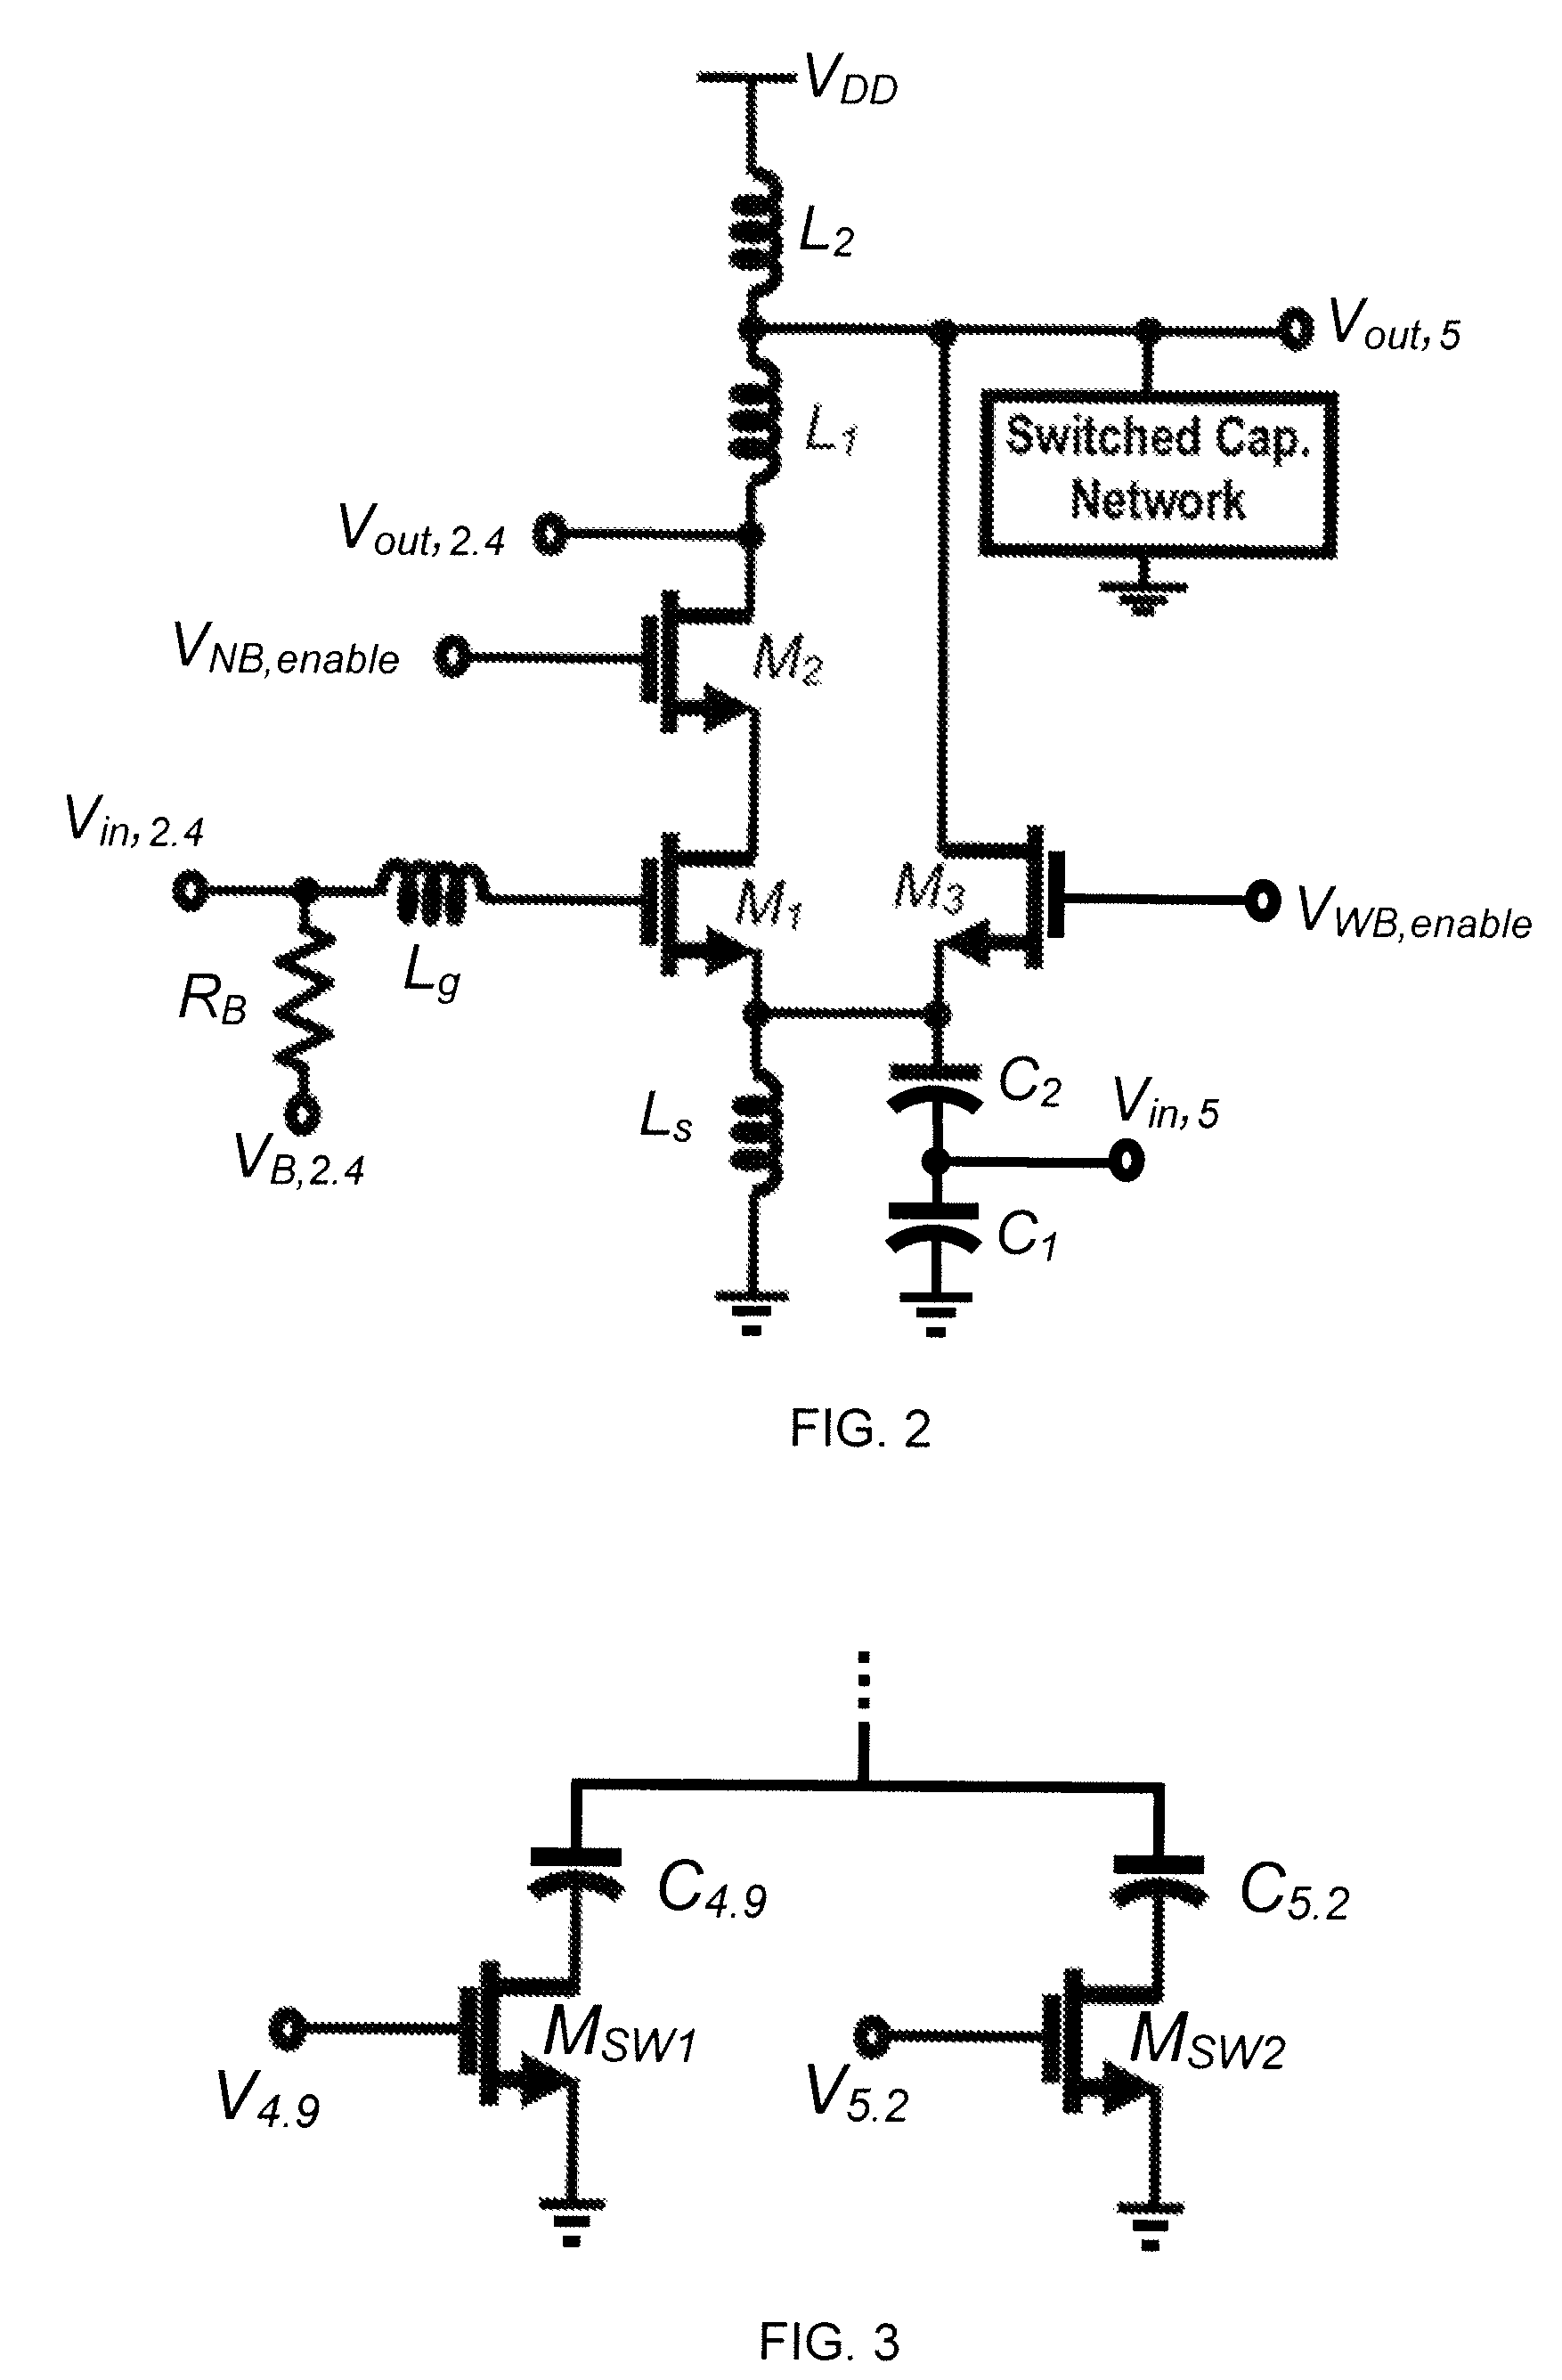 Multi-band, inductor re-use low noise amplifier